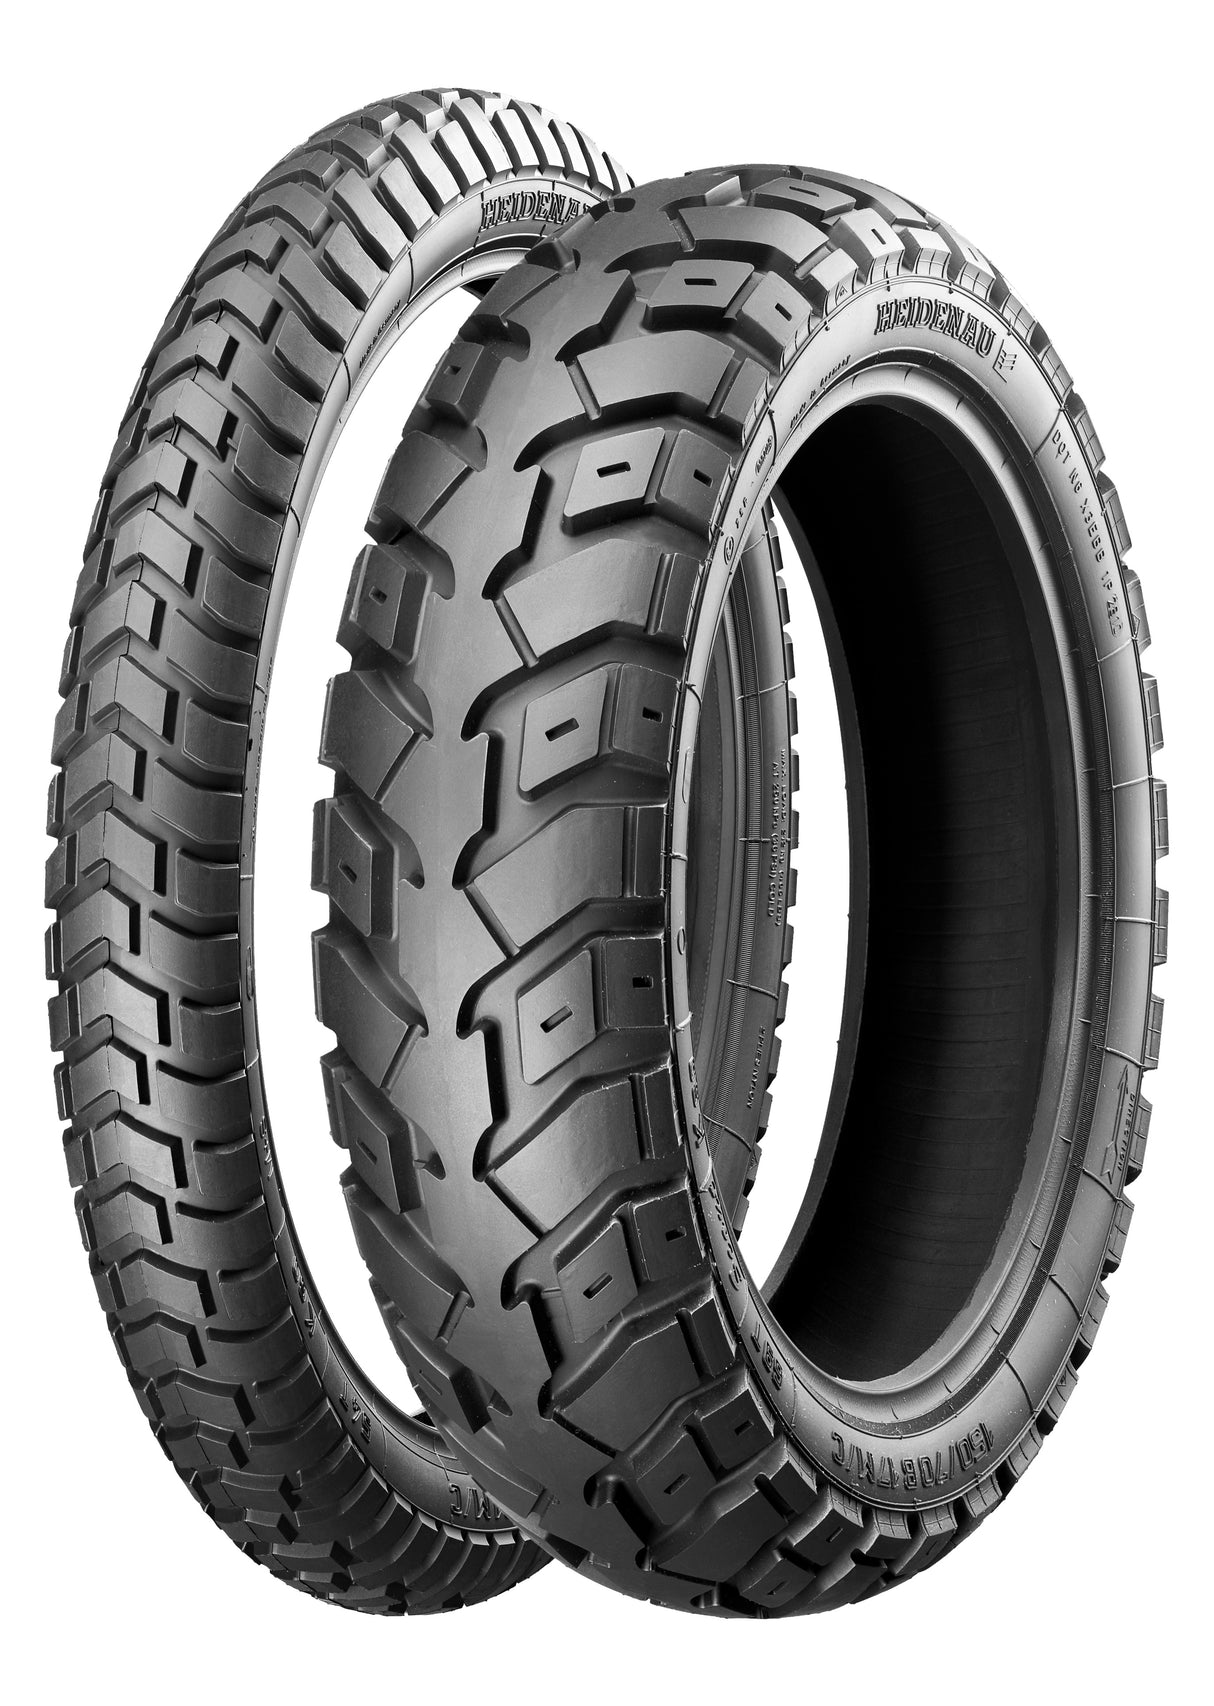 Heidenau K60 Scout 110/80 B 19 M/C 59T M+S TL Dual Sport Off Road Front Tyre